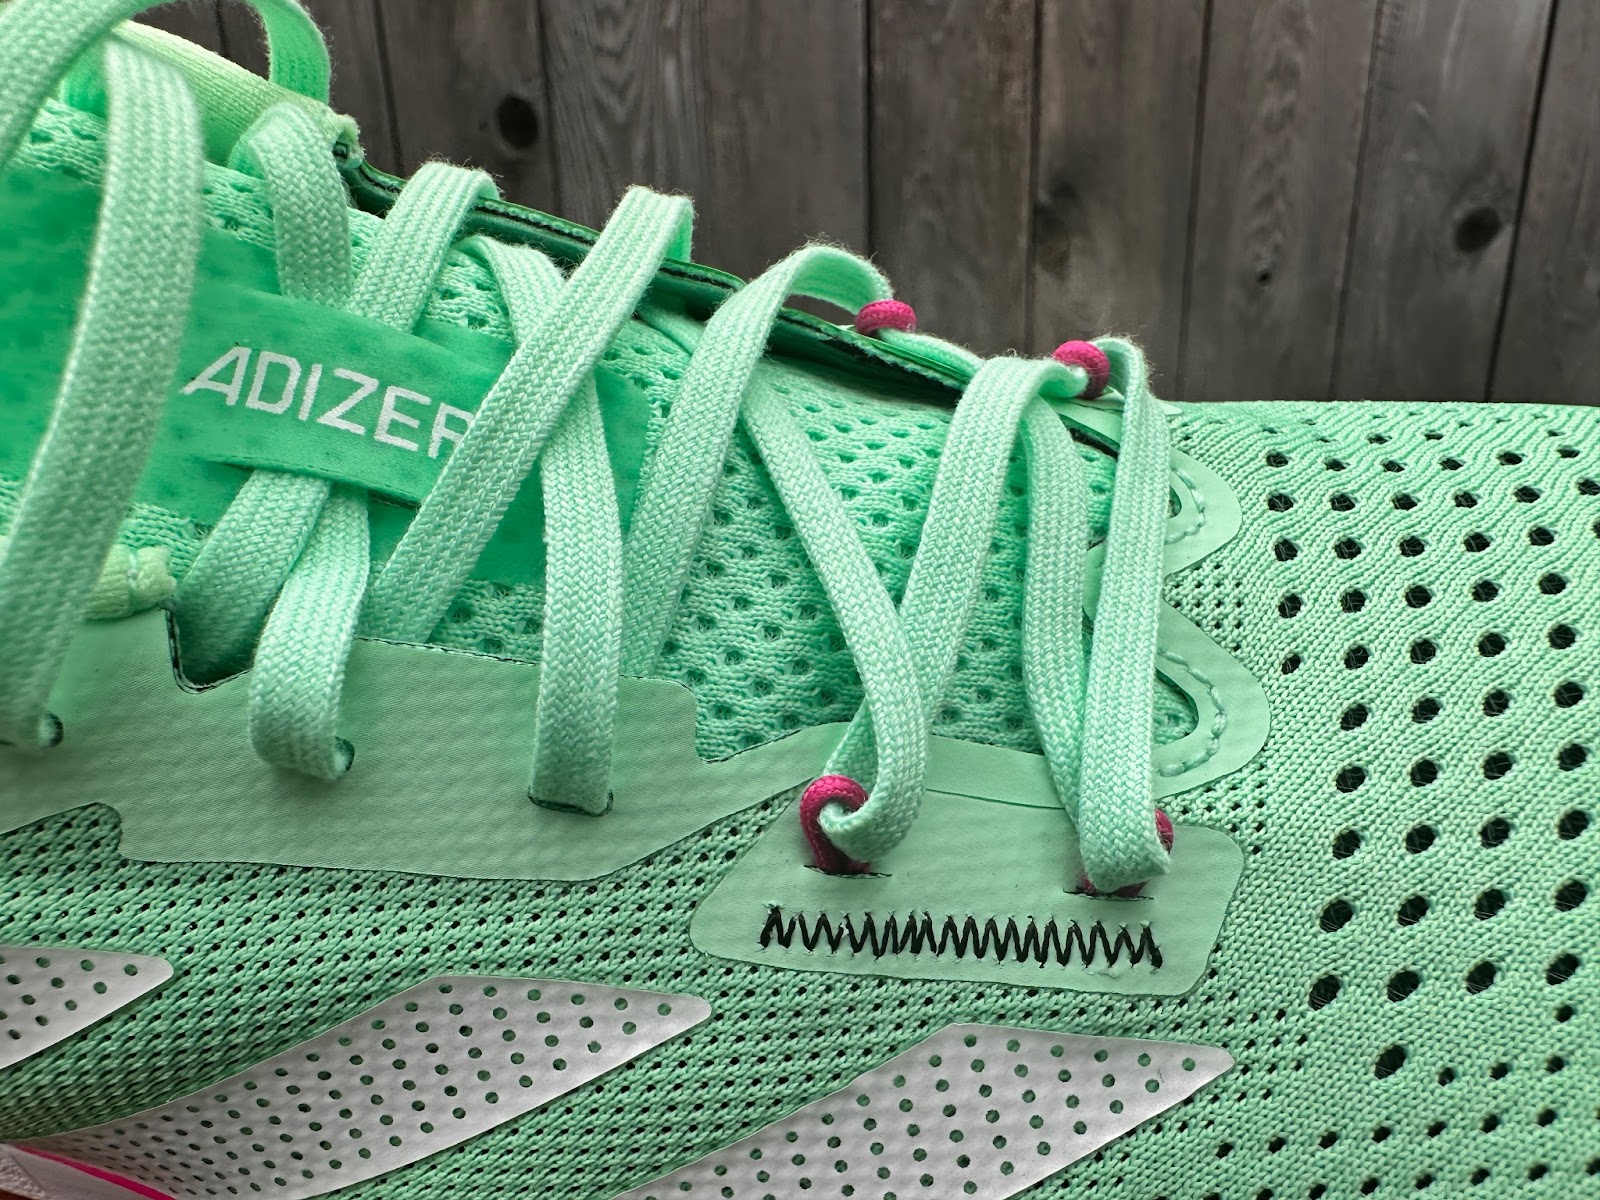 Adidas Adizero SL, review and details, From £54.75